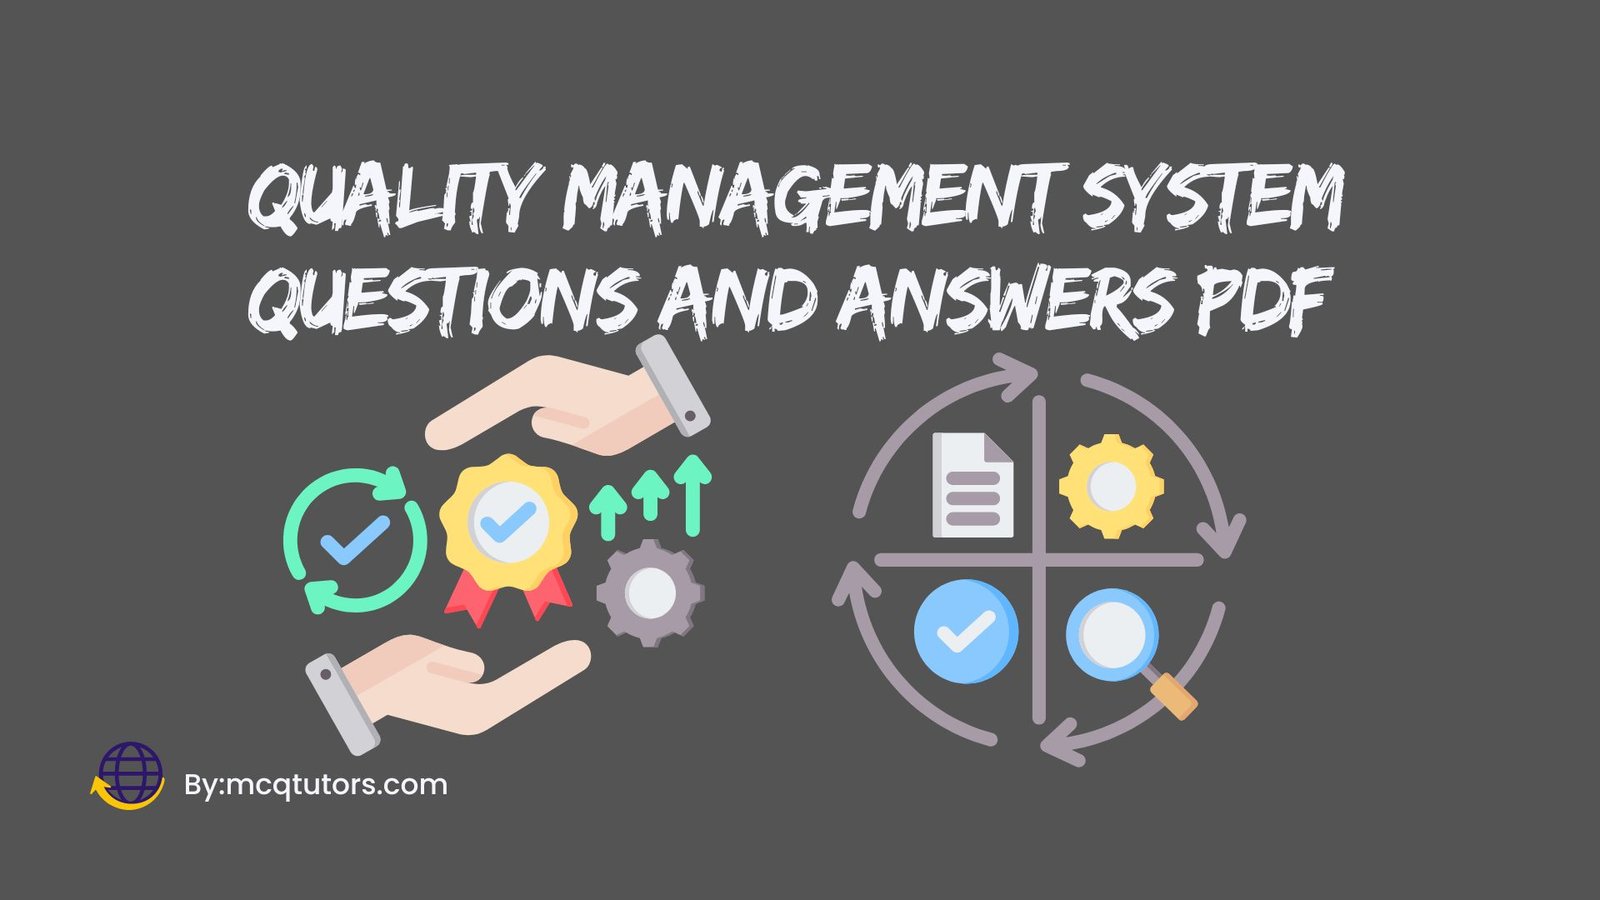 Quality Management System questions and answers pdf